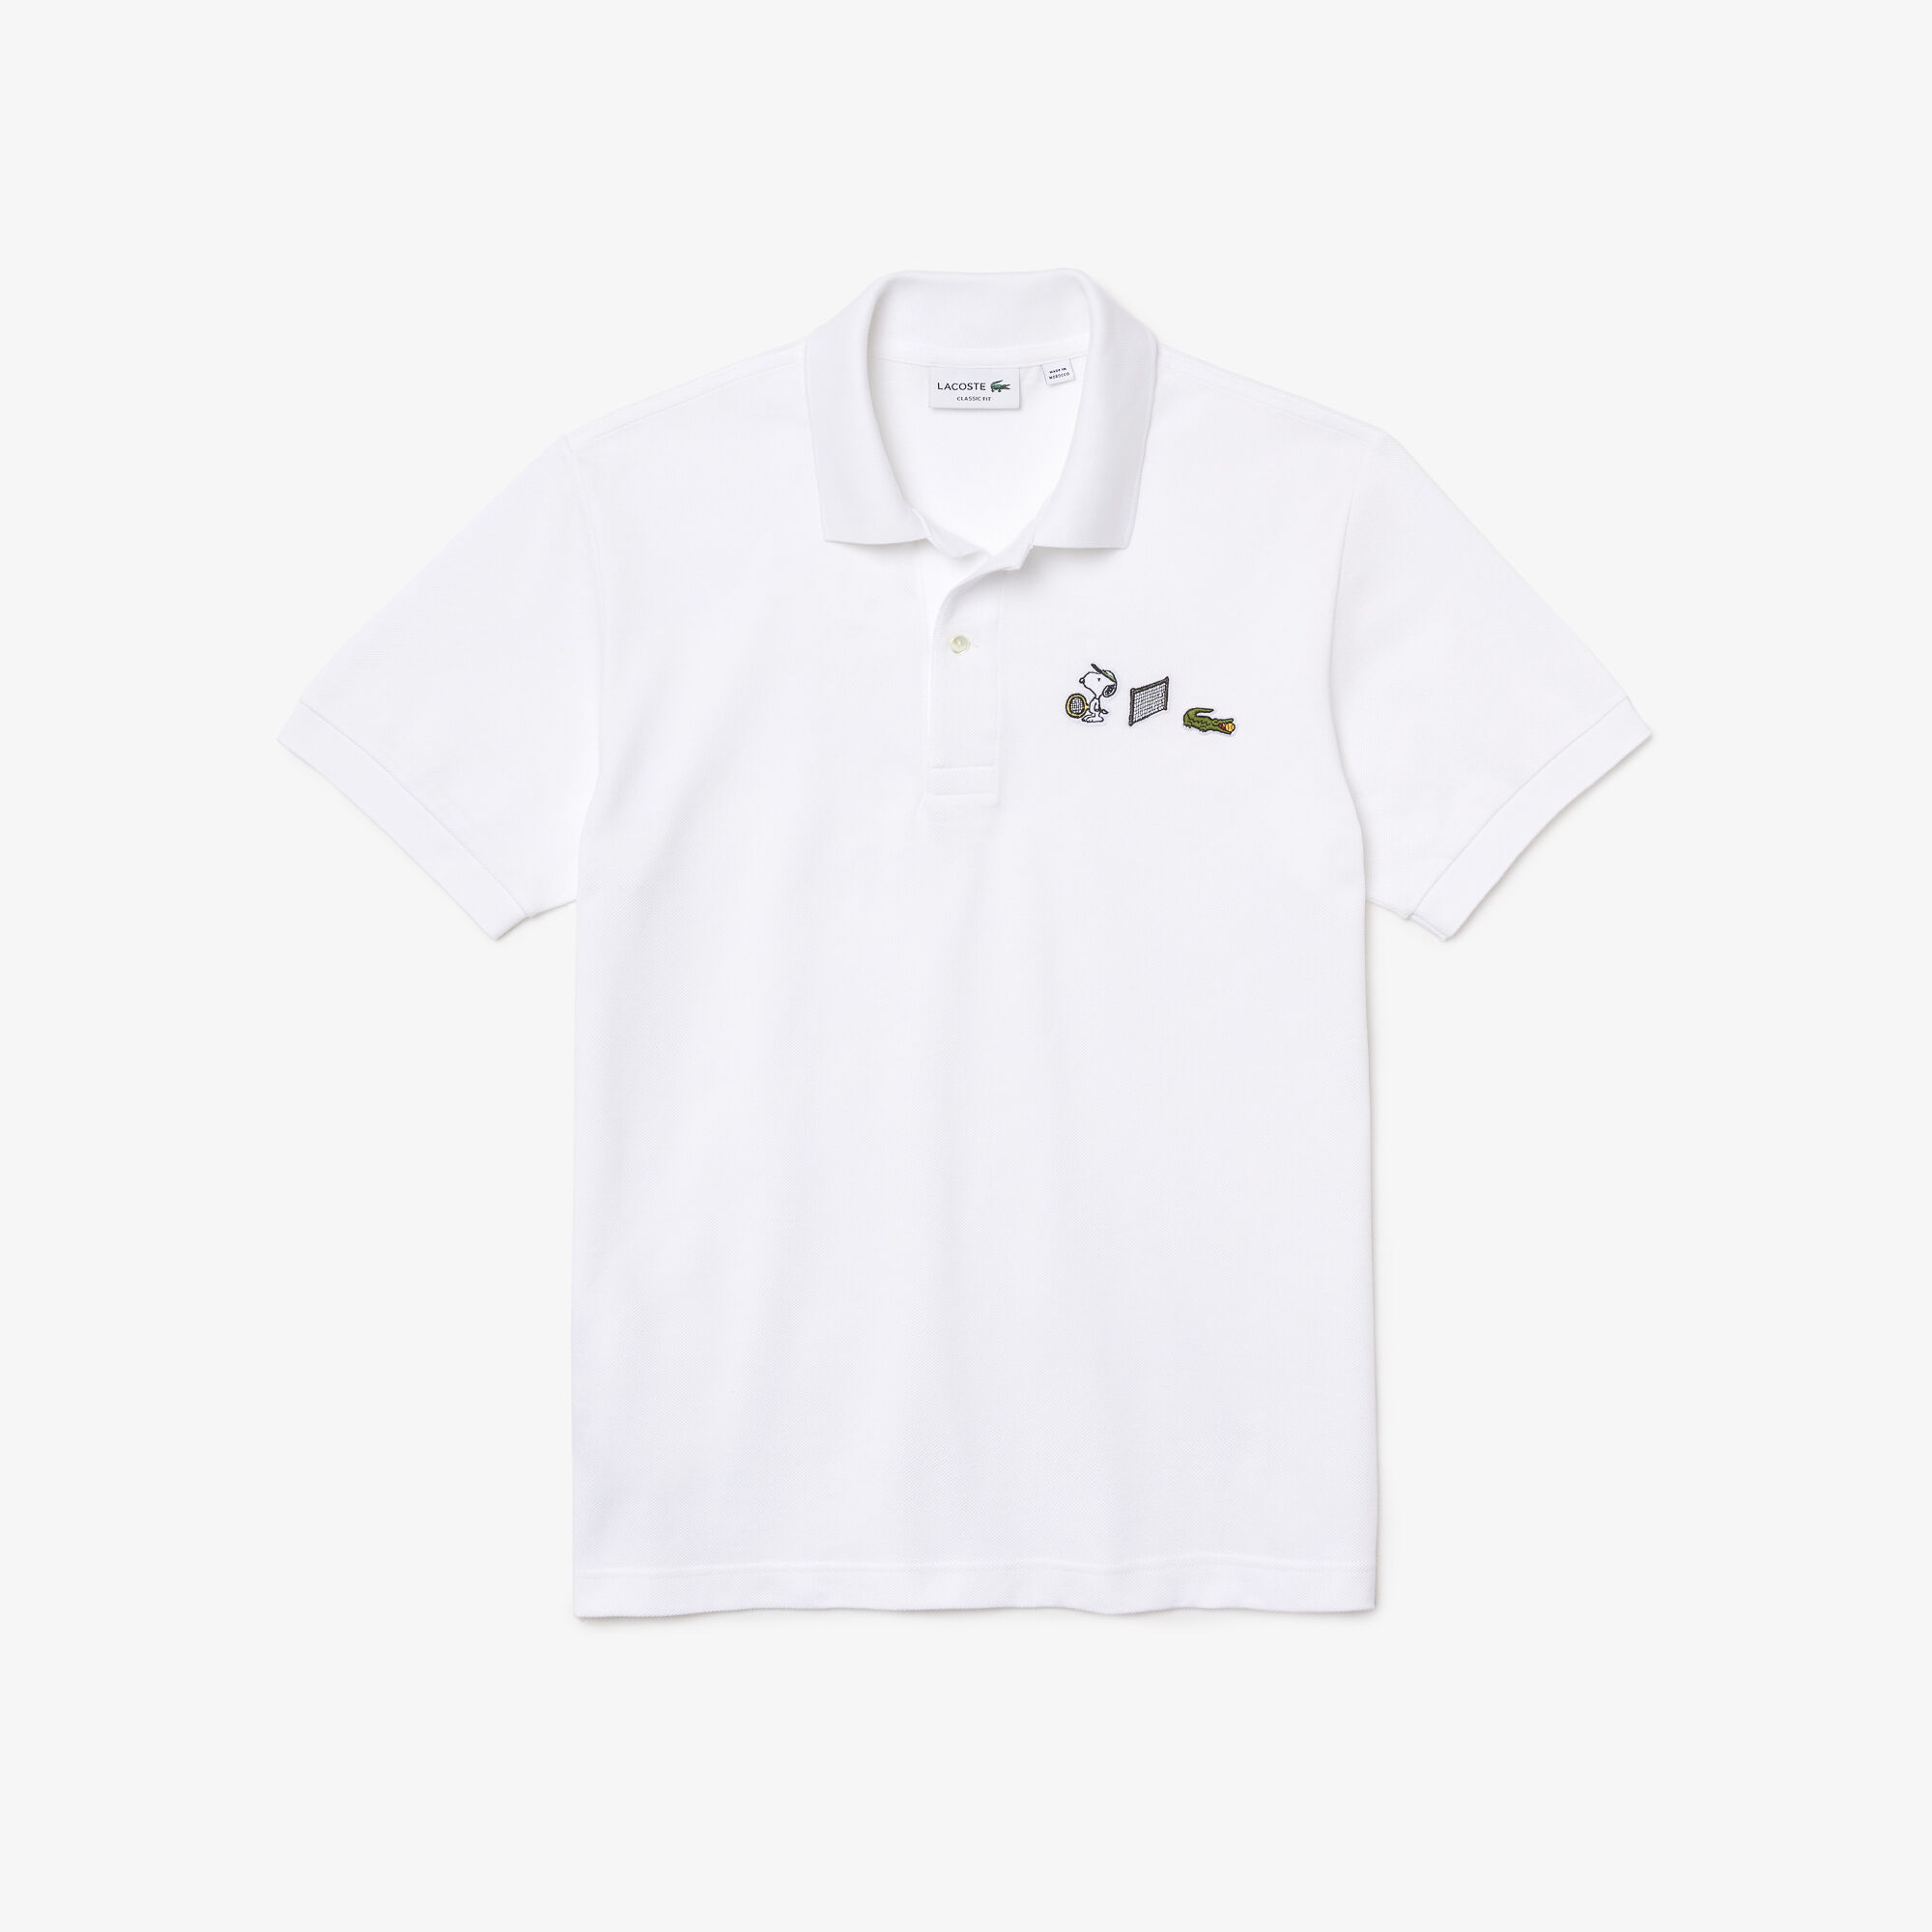 Men’s Lacoste x Peanuts Relaxed Fit Organic Cotton Polo